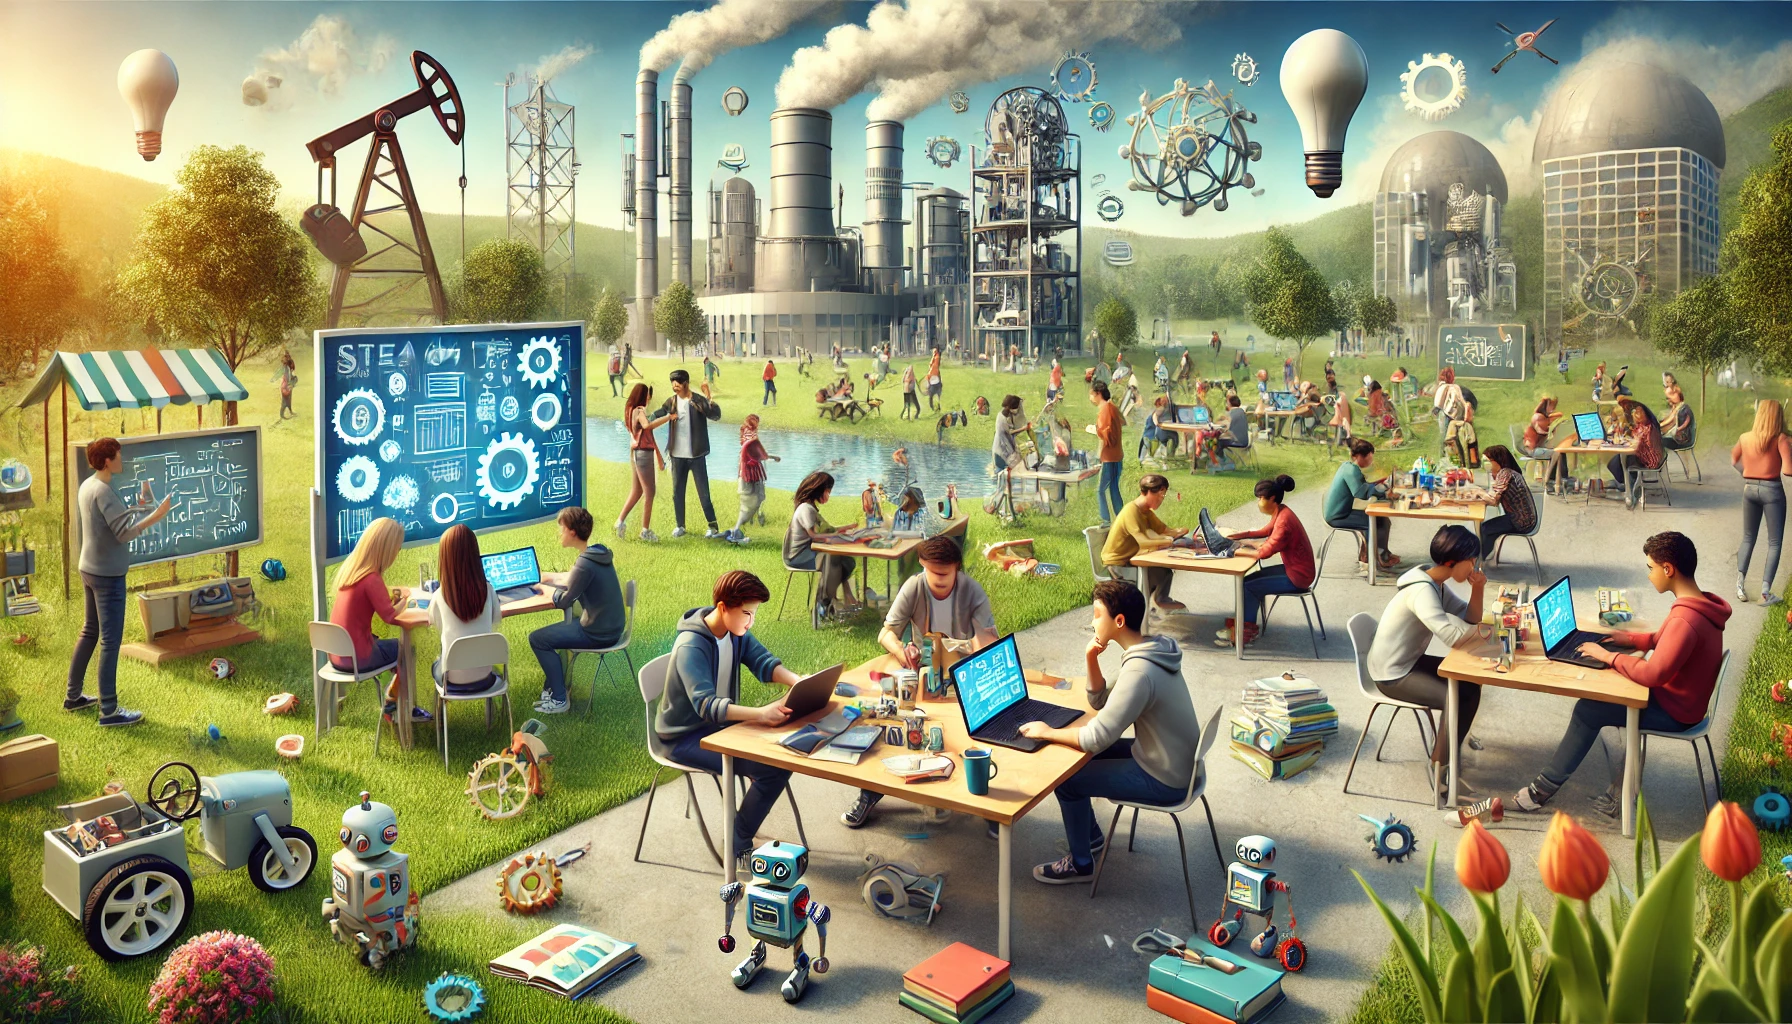 Students engaging in various outdoor activities that integrate engineering principles, including robotics, environmental science, and industrial design, with factories and machinery in the background. STEAM's Role in Tackling Global Challenges